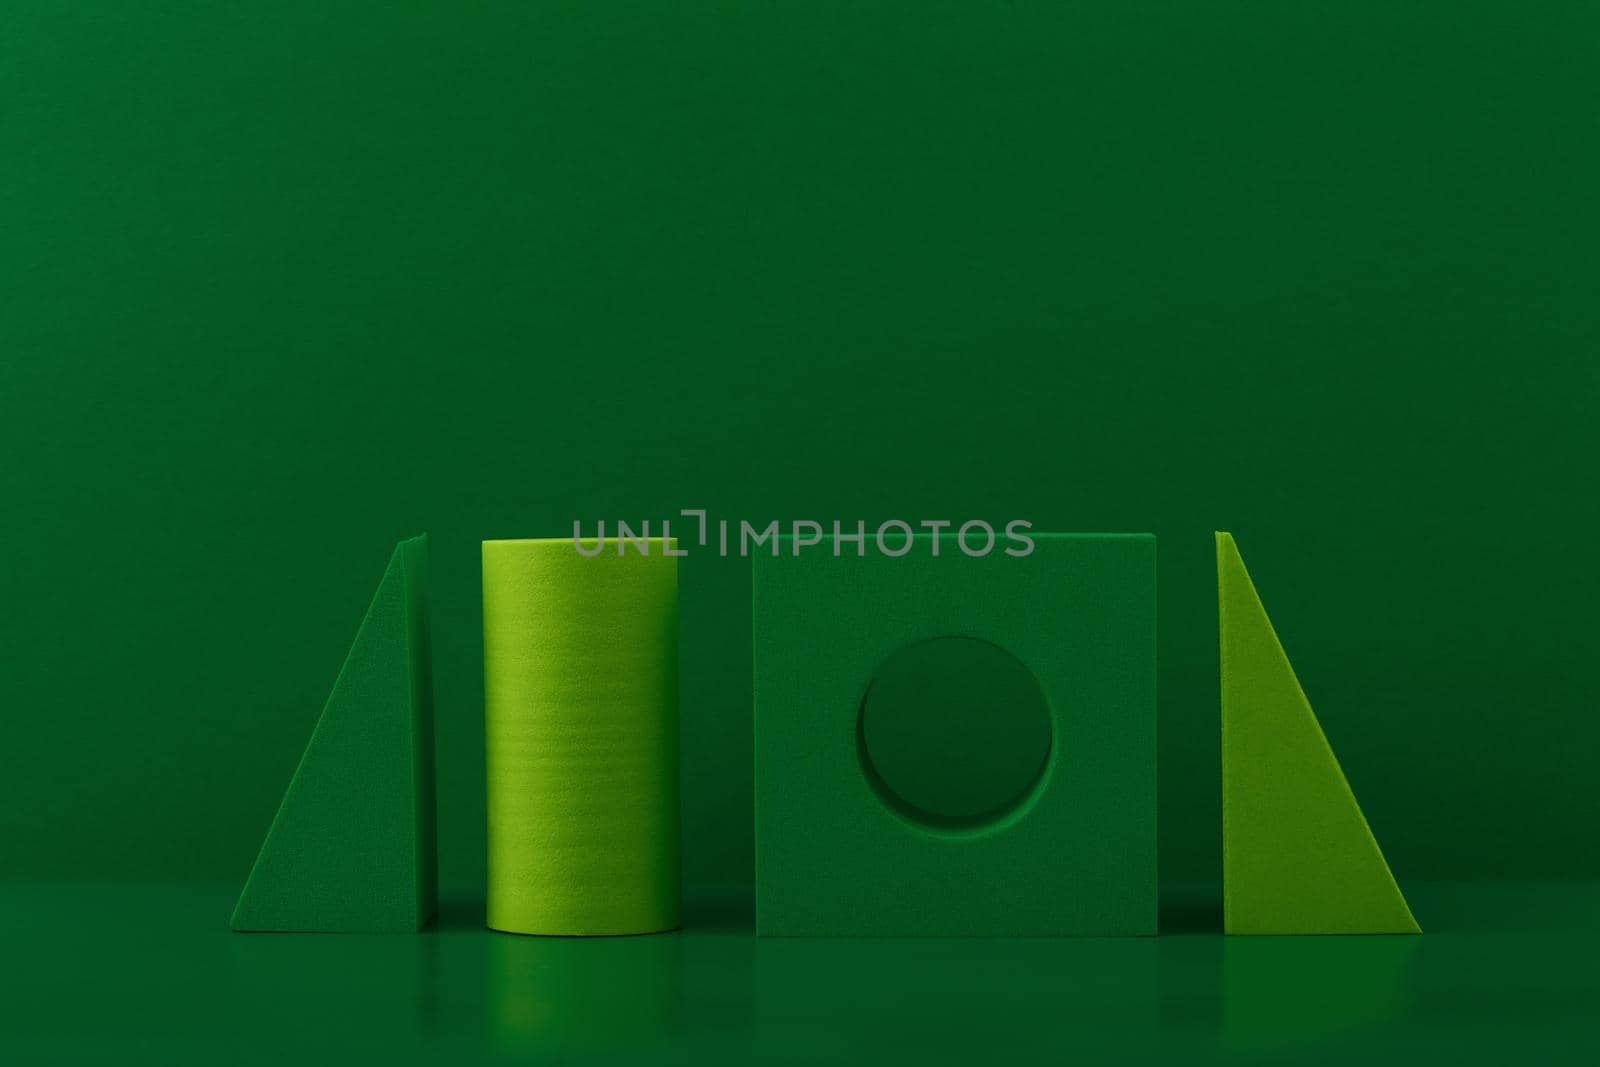 Simple monochromatic still life with light and dark green geometric figures on green background with space for text